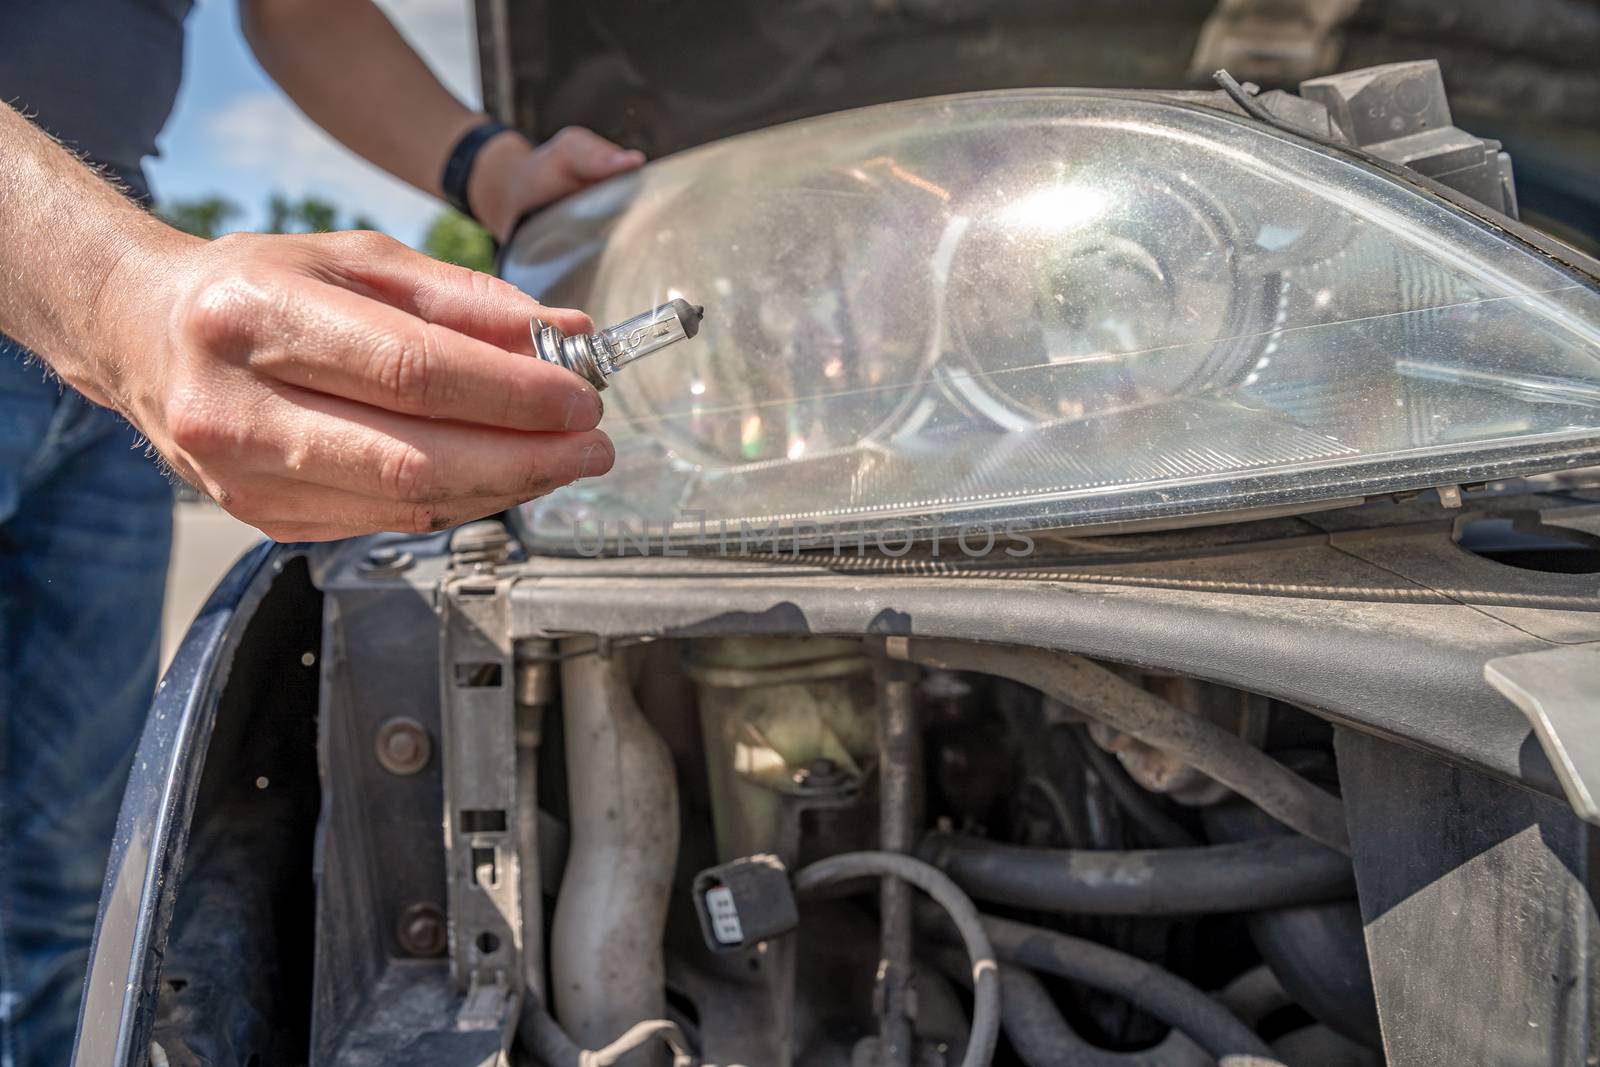 The man changes the bulb in the headlight of a car by Edophoto